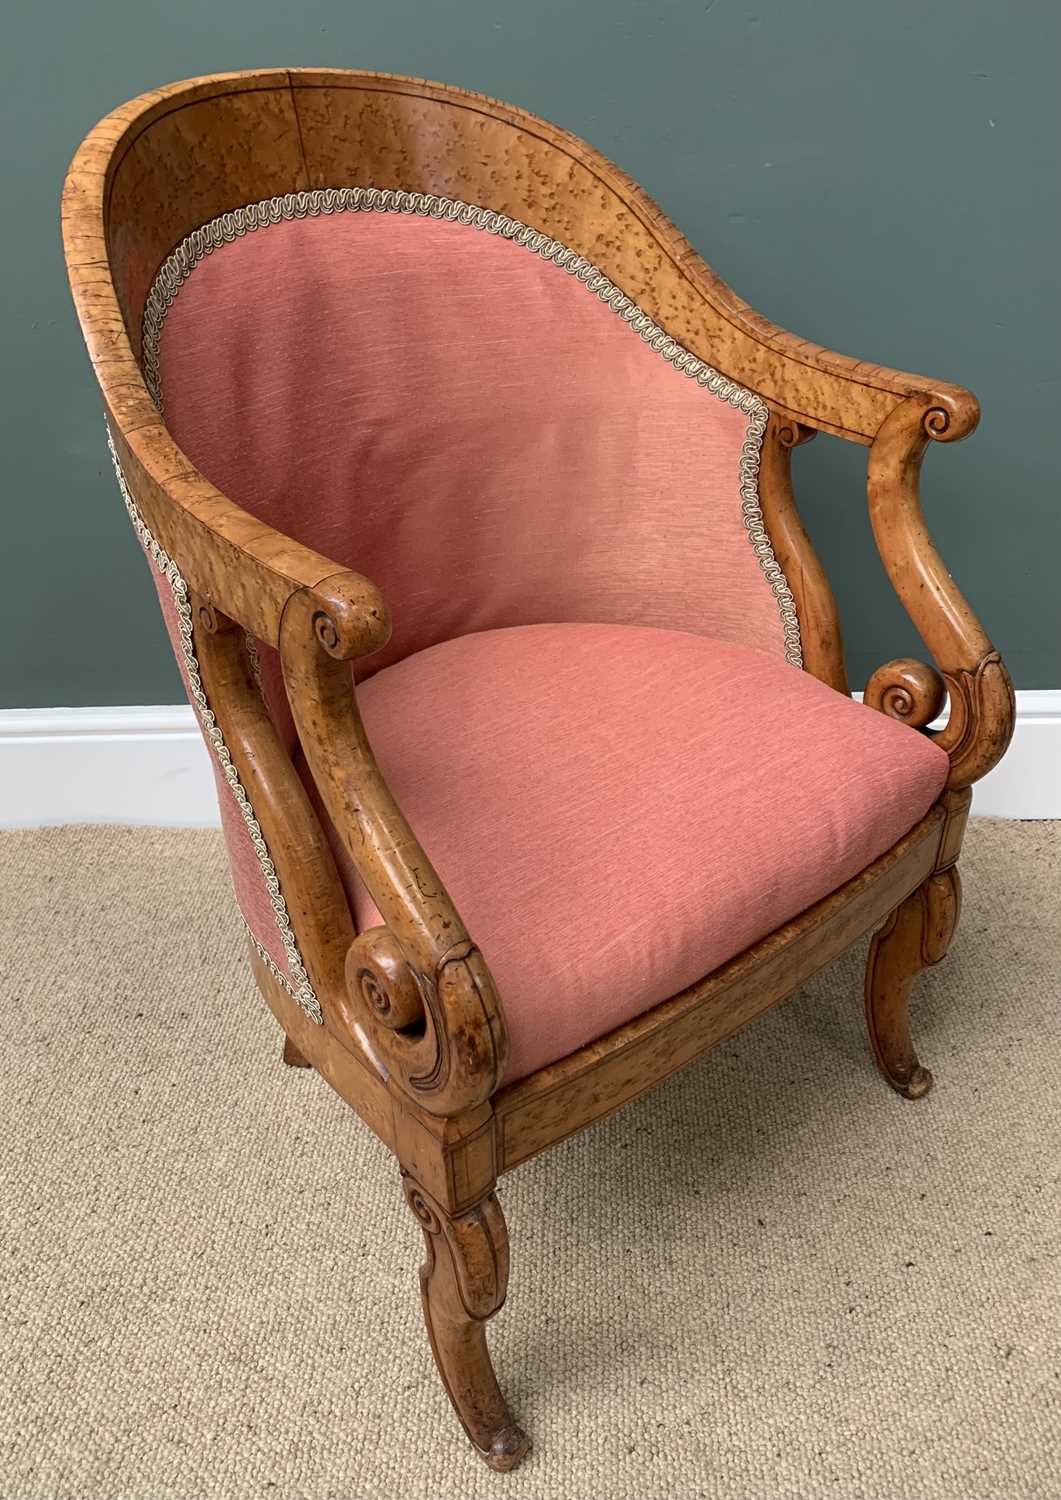 ELEGANT BIRD'S EYE MAPLE TUB TYPE ELBOW CHAIR with pink upholstery, with scrolled arms and shaped